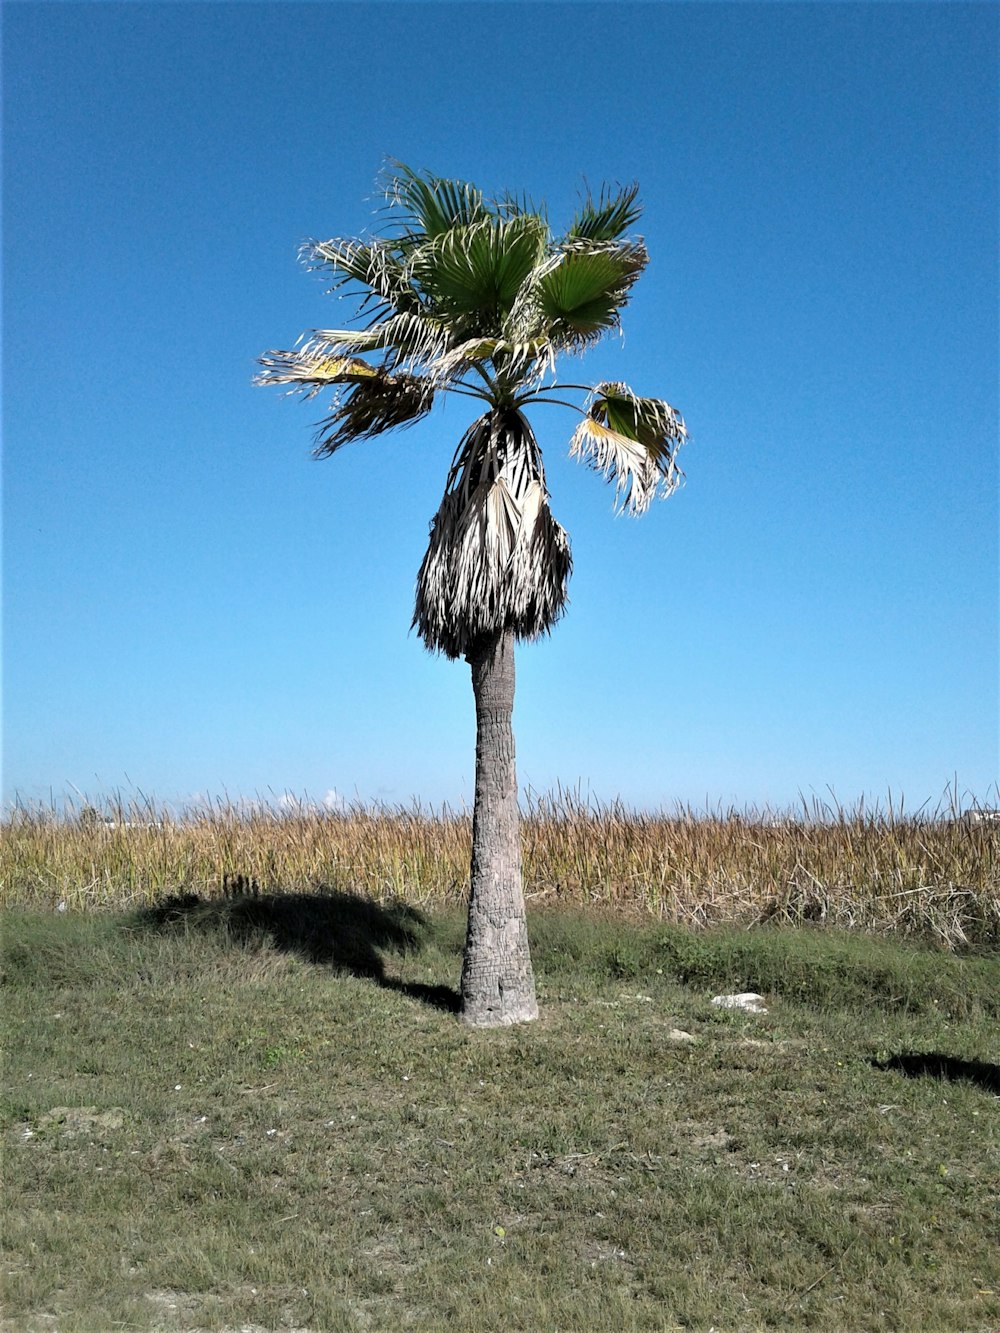 green palm tree on green grass field under blue sky during daytime